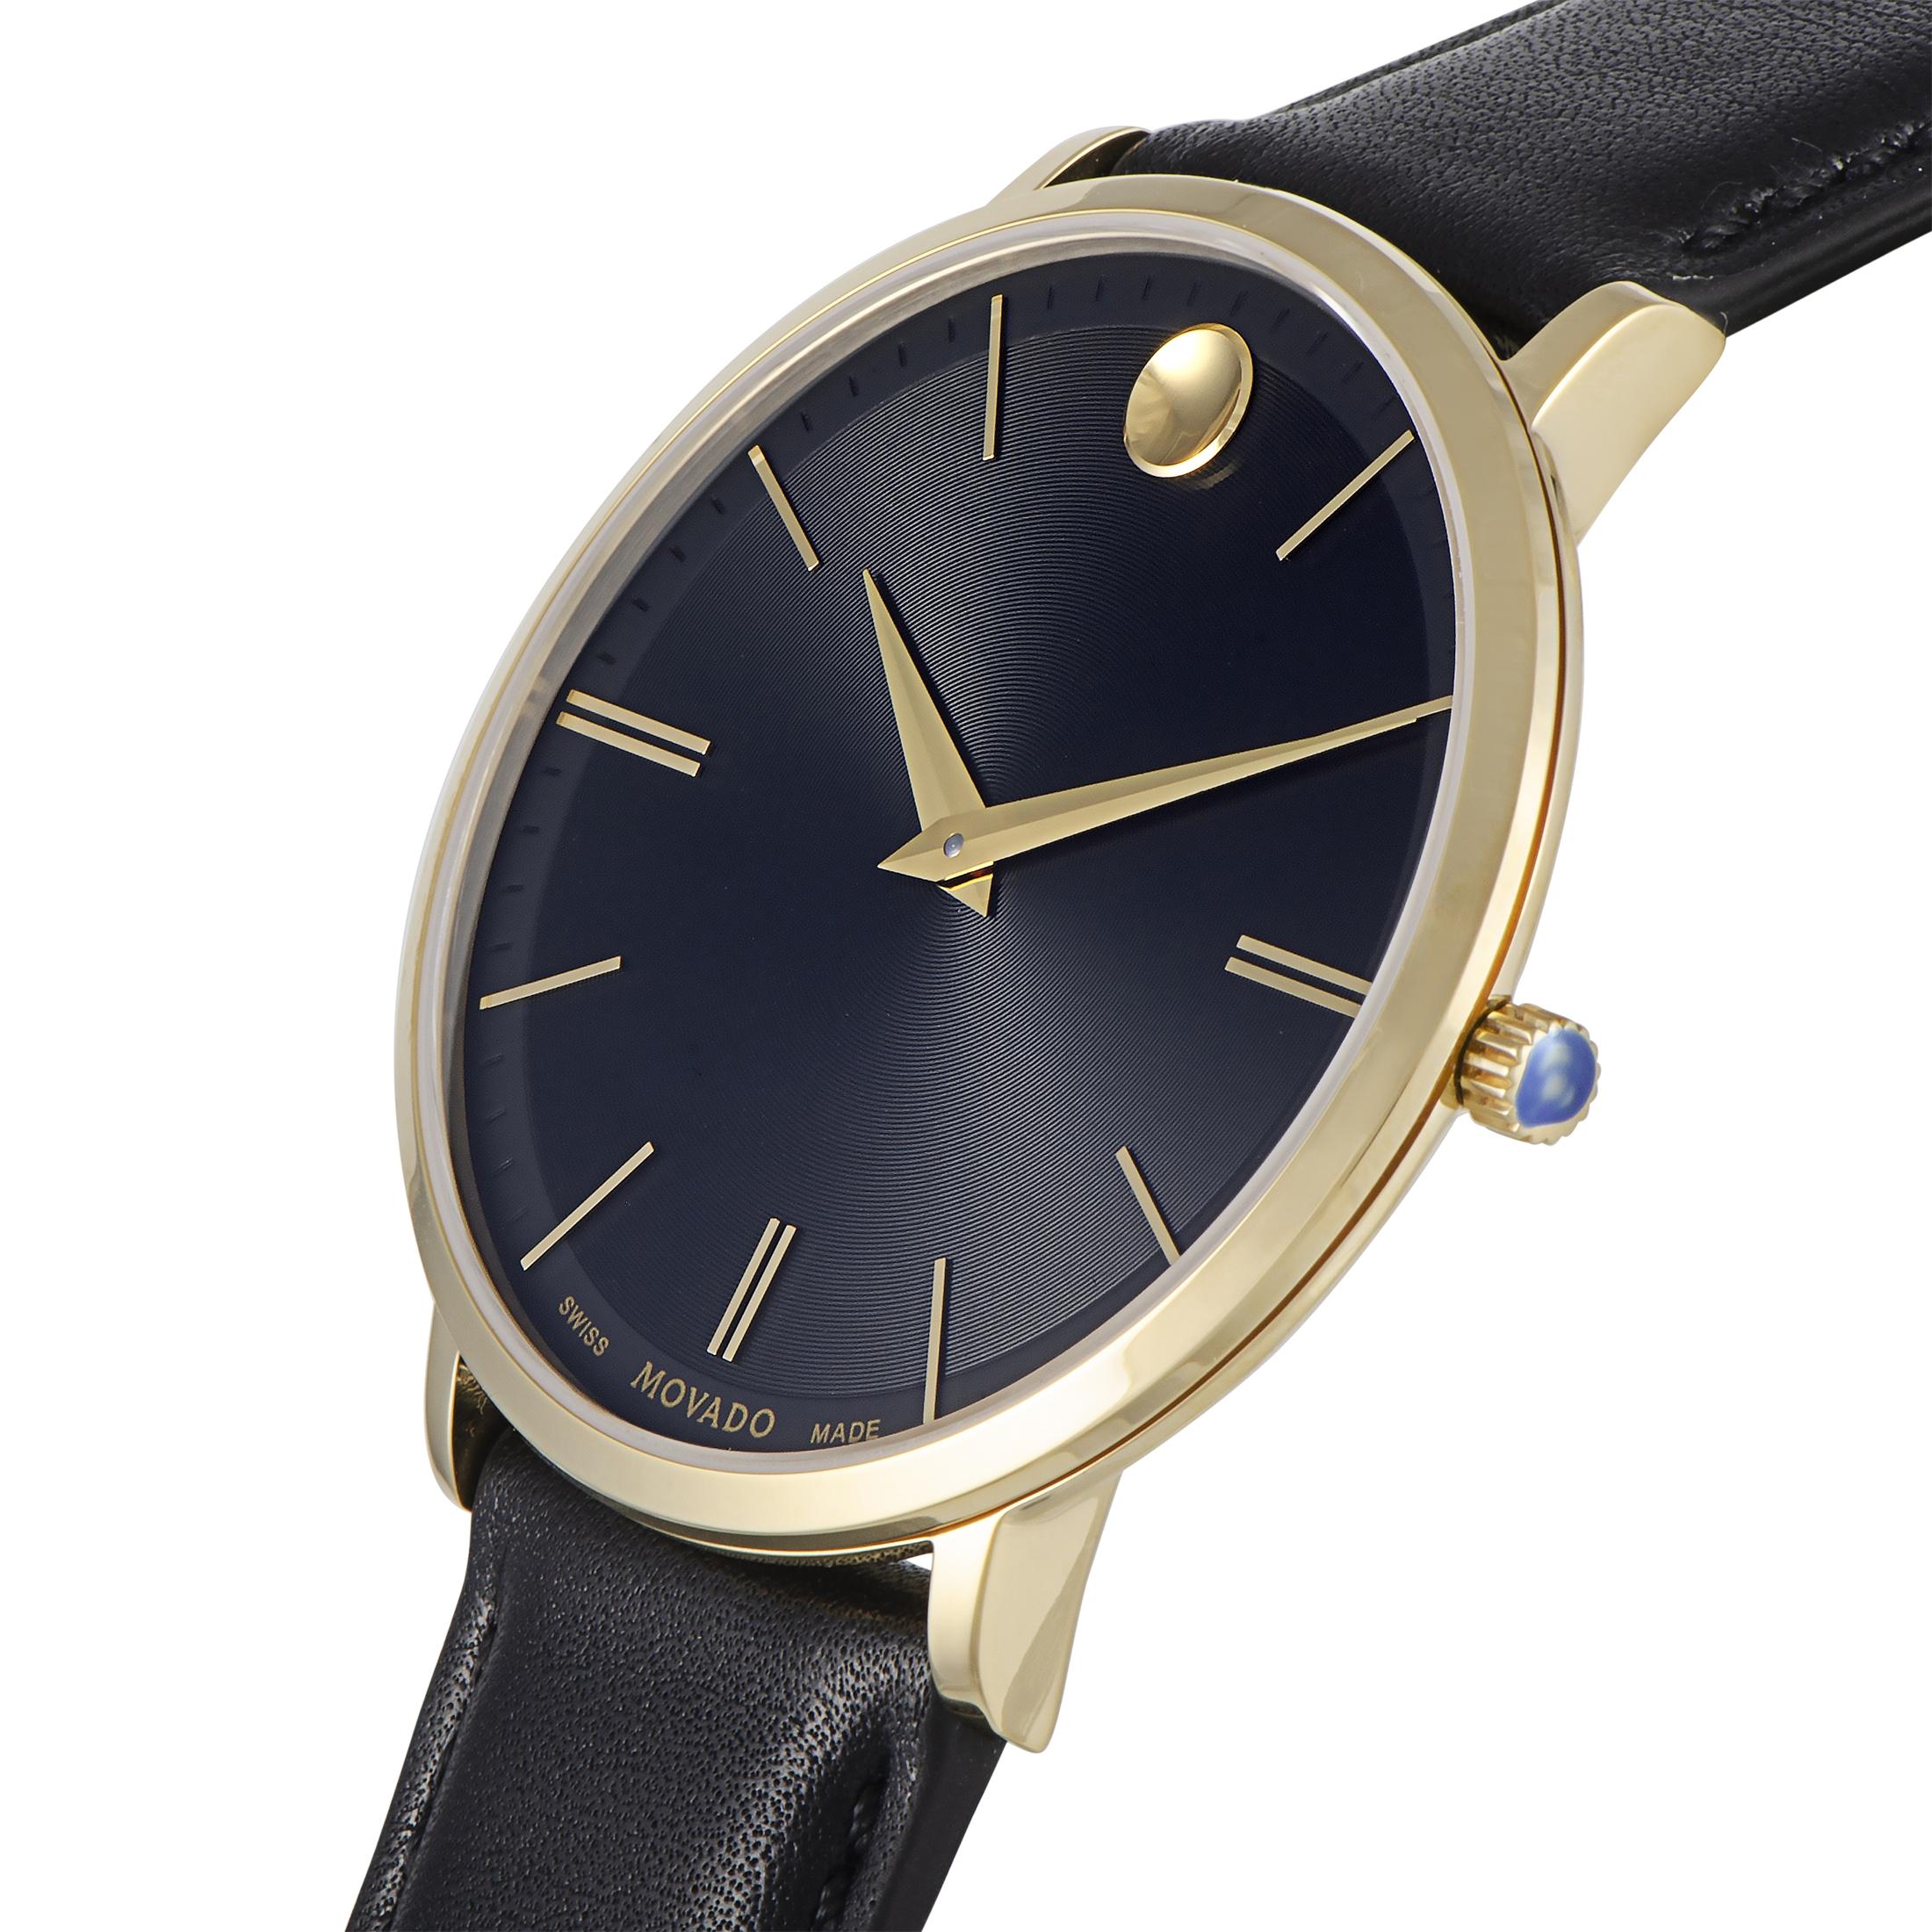 This is the Movado Ultra Slim watch, reference number 0607087.

It is presented with a yellow gold PVD-plated stainless steel case that is only 6.3 mm thick and measures 40 mm in diameter. The watch is powered by a quartz movement and indicates